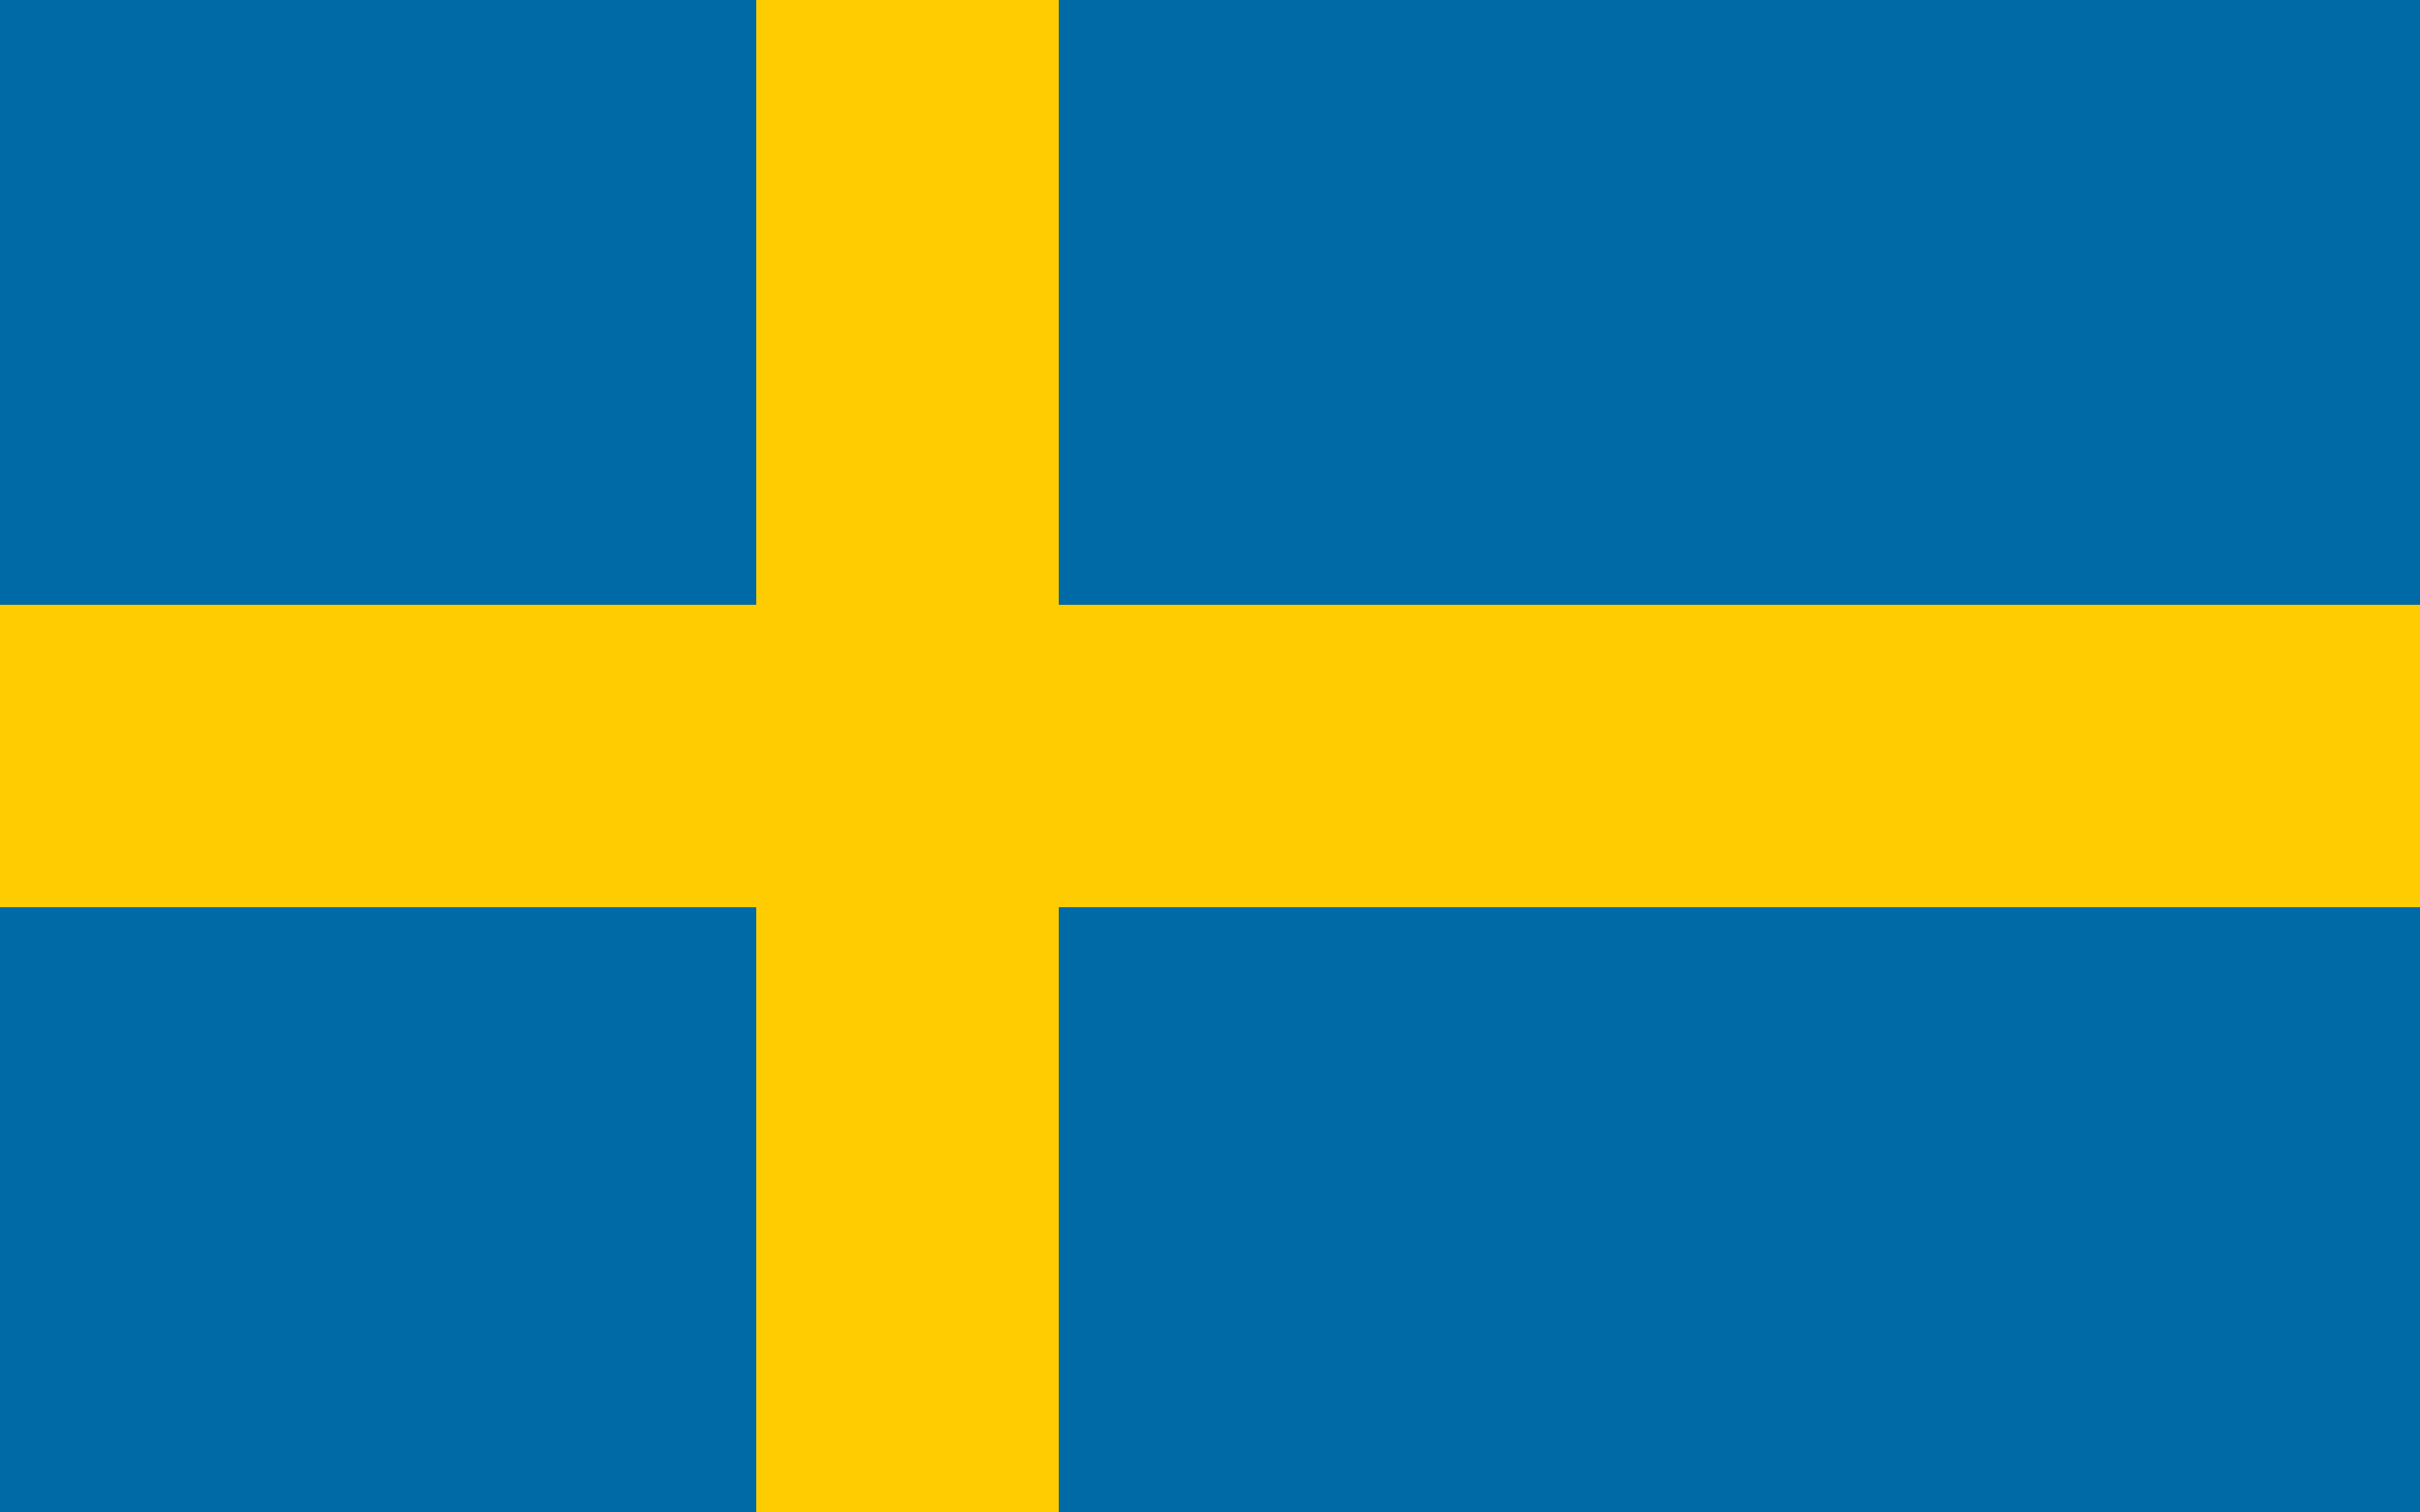 Drone Laws in Sweden